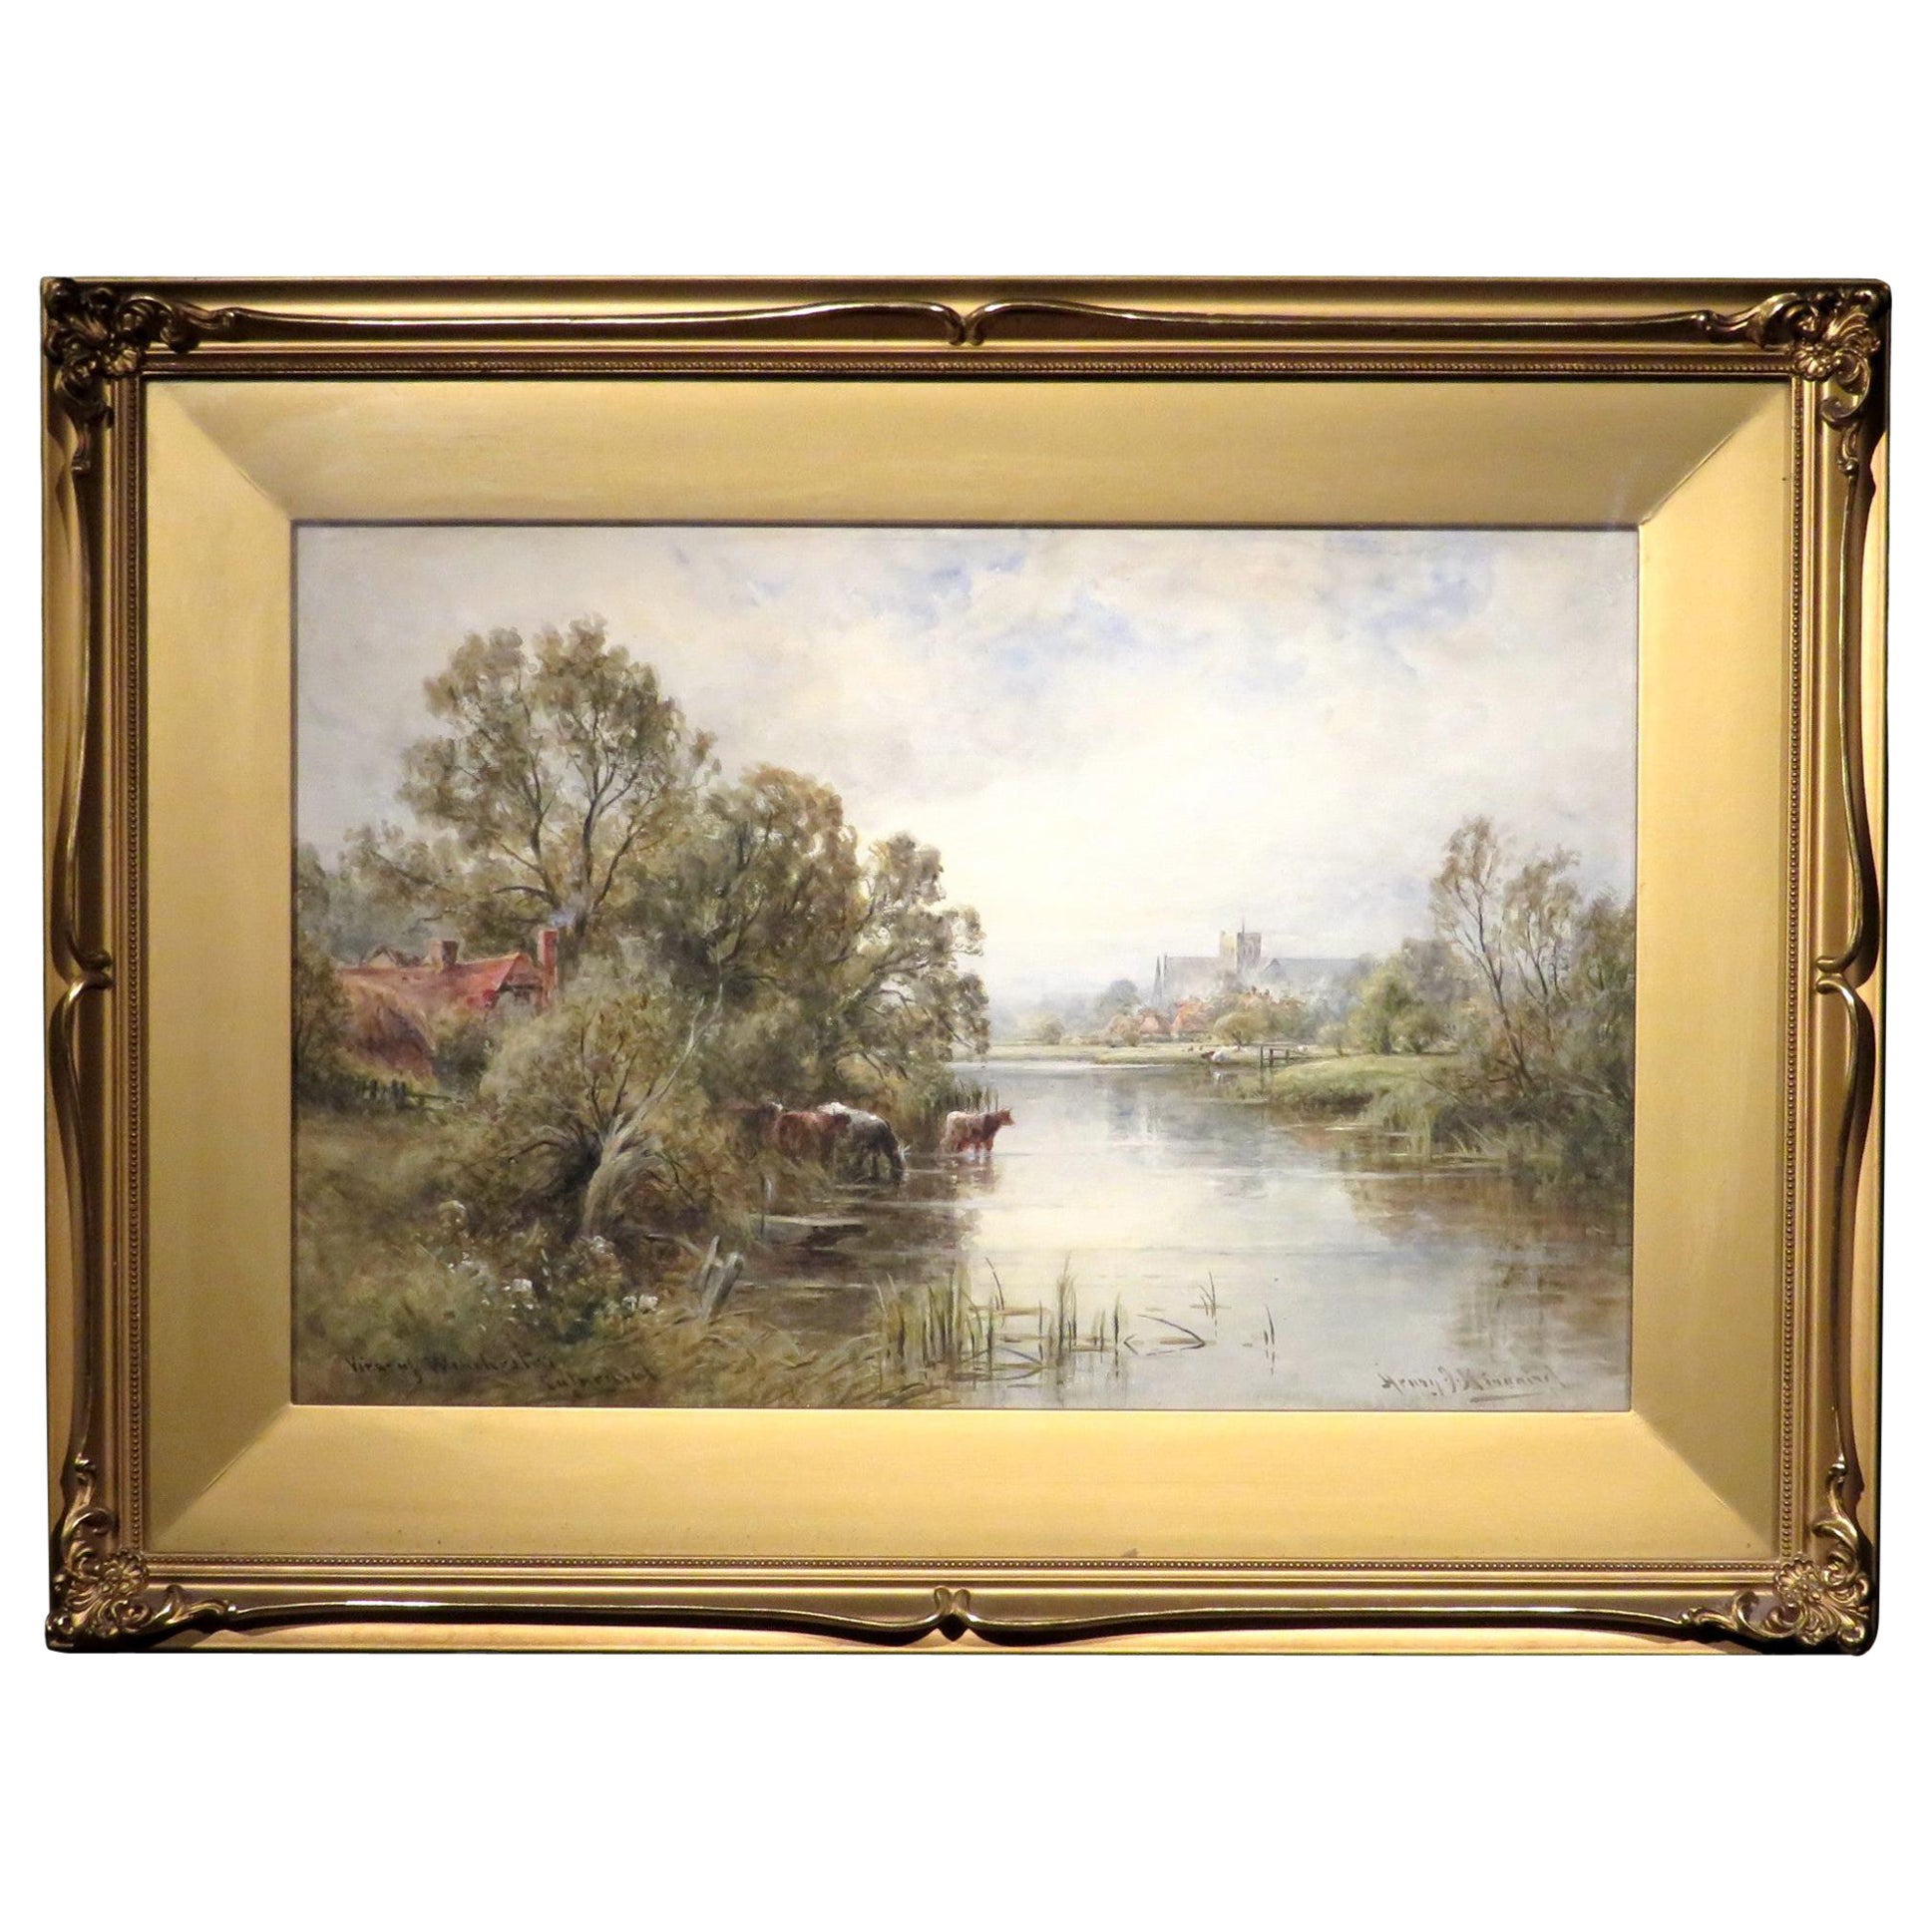 A Very Fine 19th Century British Watercolor Landscape by Henry John Kinnaird For Sale